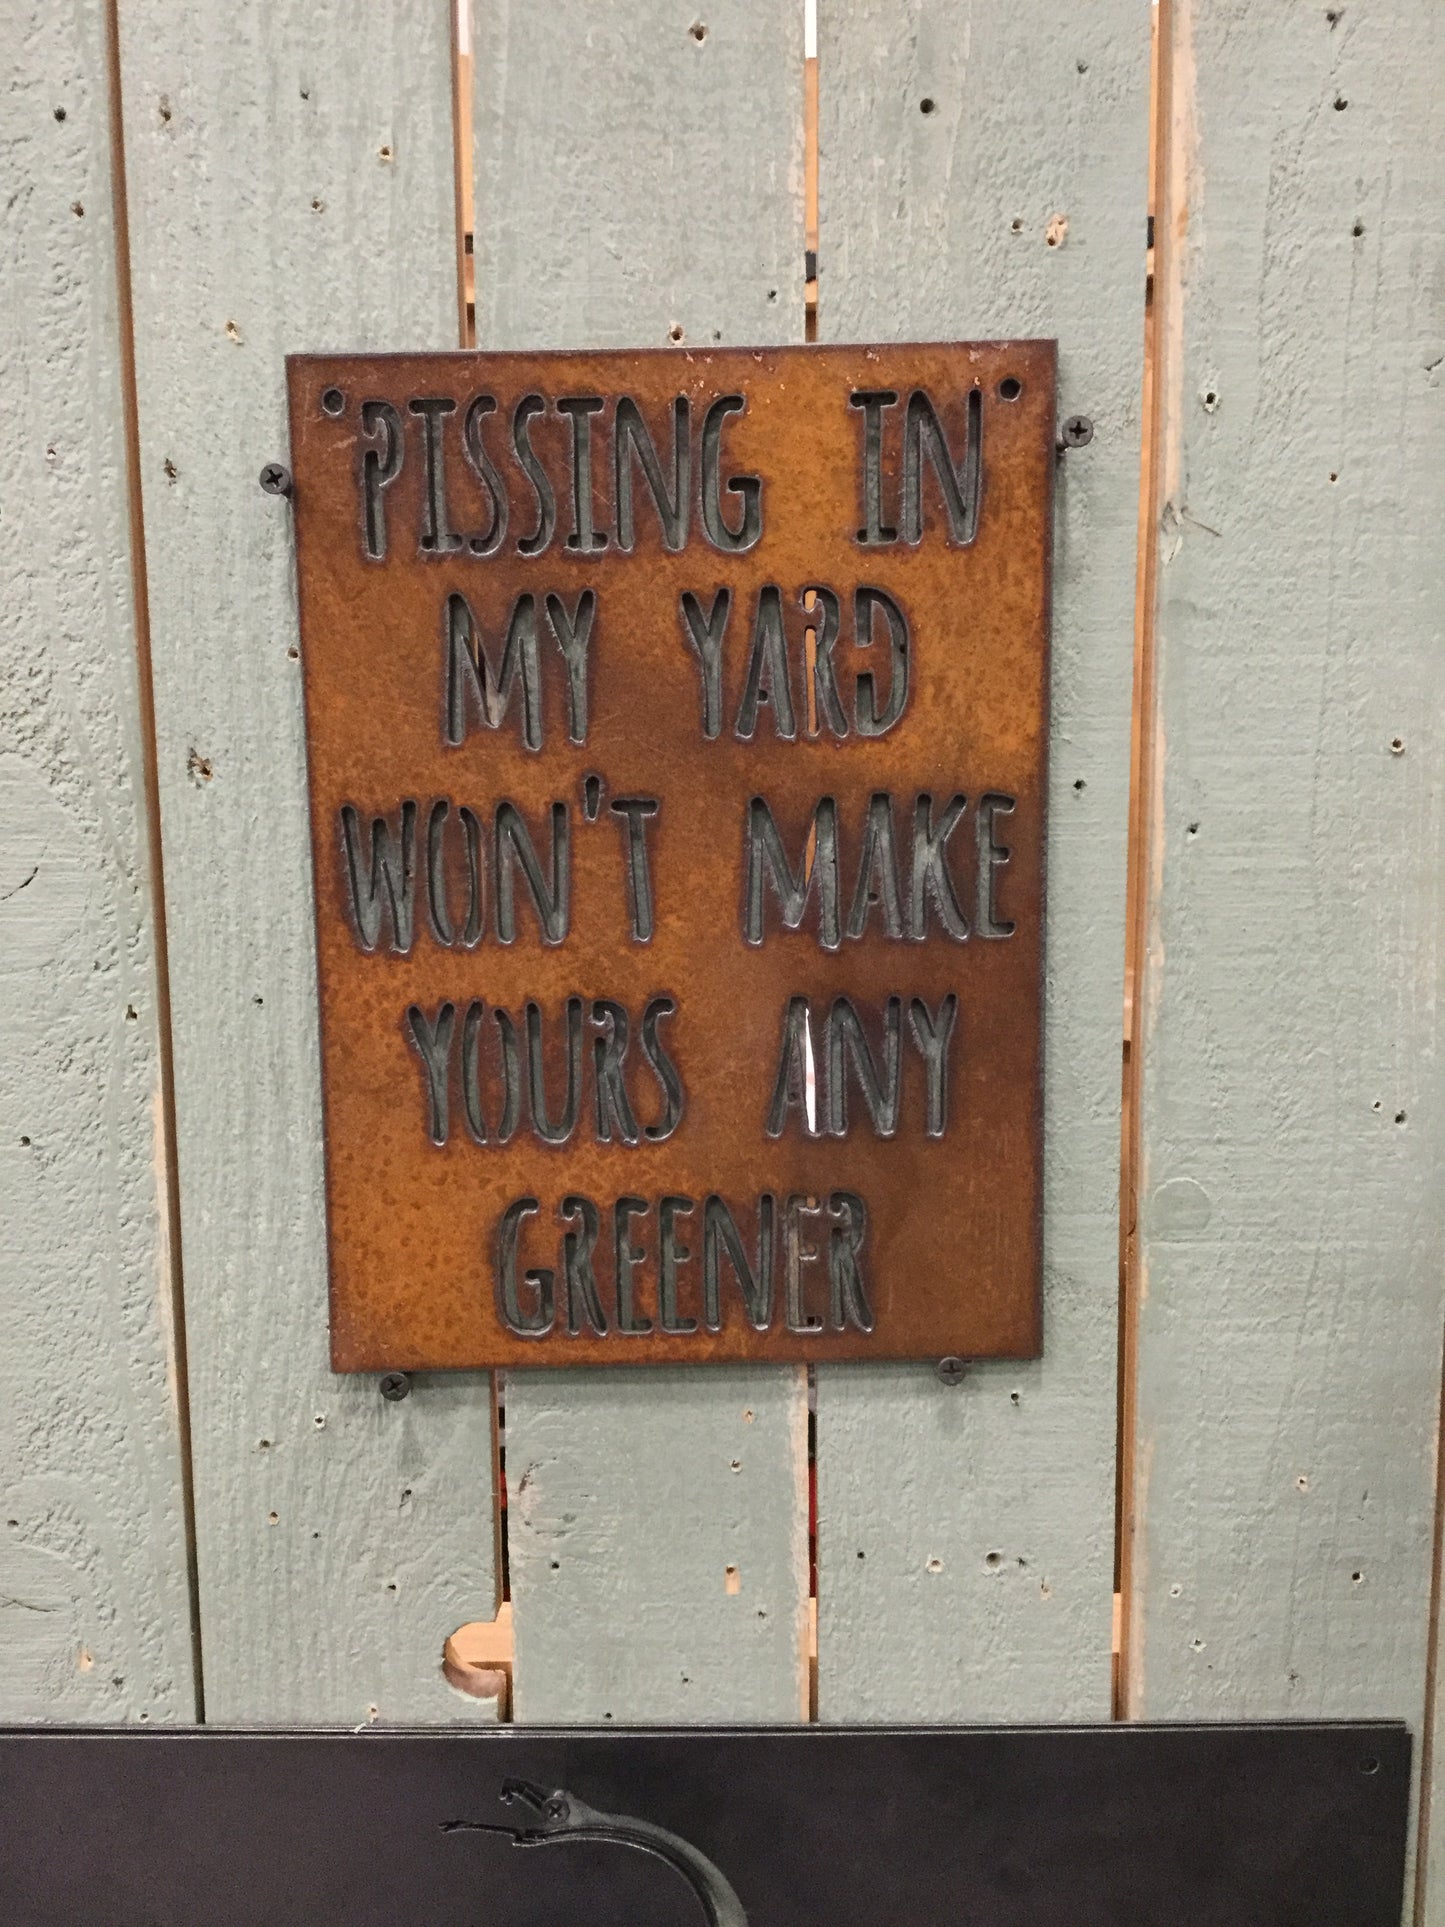 Pissing in My Yard Ain't Gonna Make Yours Any Greener Metal Sign